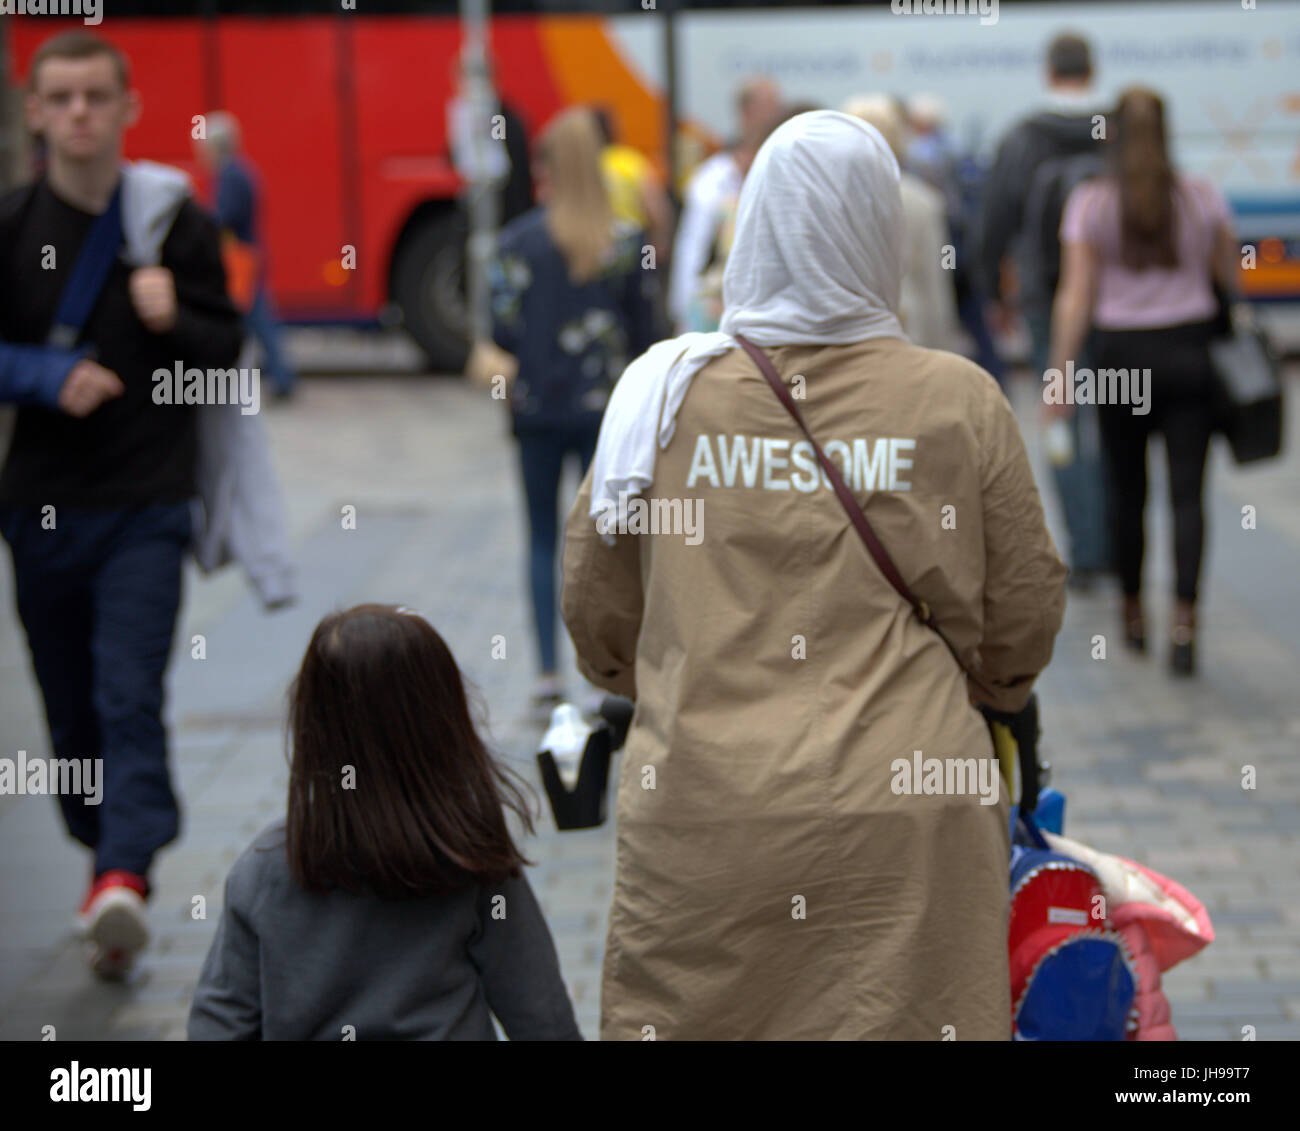 Asian family refugee young woman girl student pupil dressed Hijab scarf on street in the UK everyday scene walking on street awesome on back Stock Photo